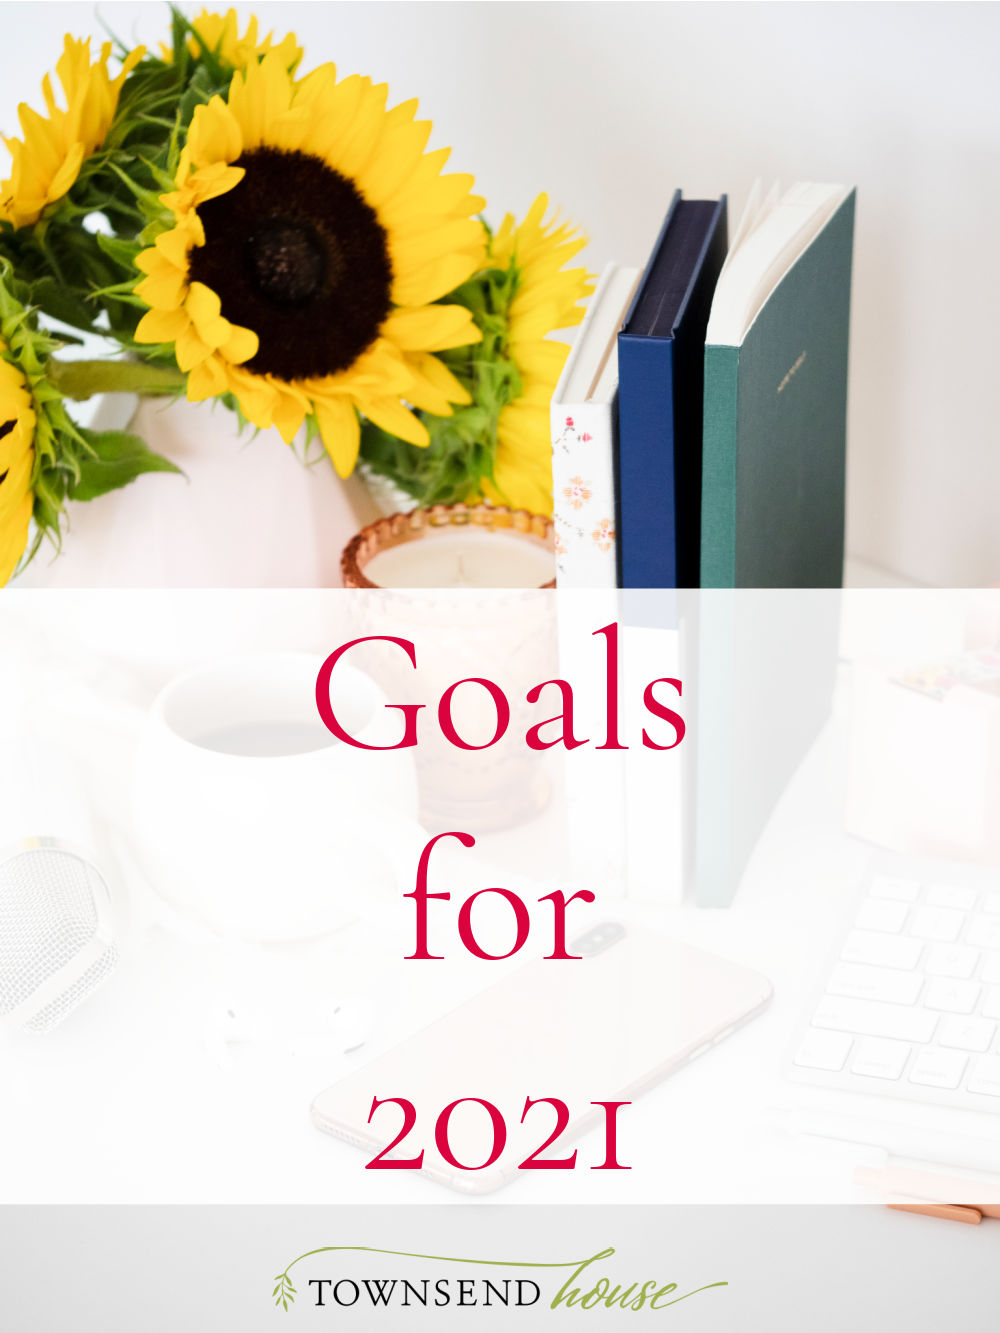 Goals for 2021: What I am working on this year